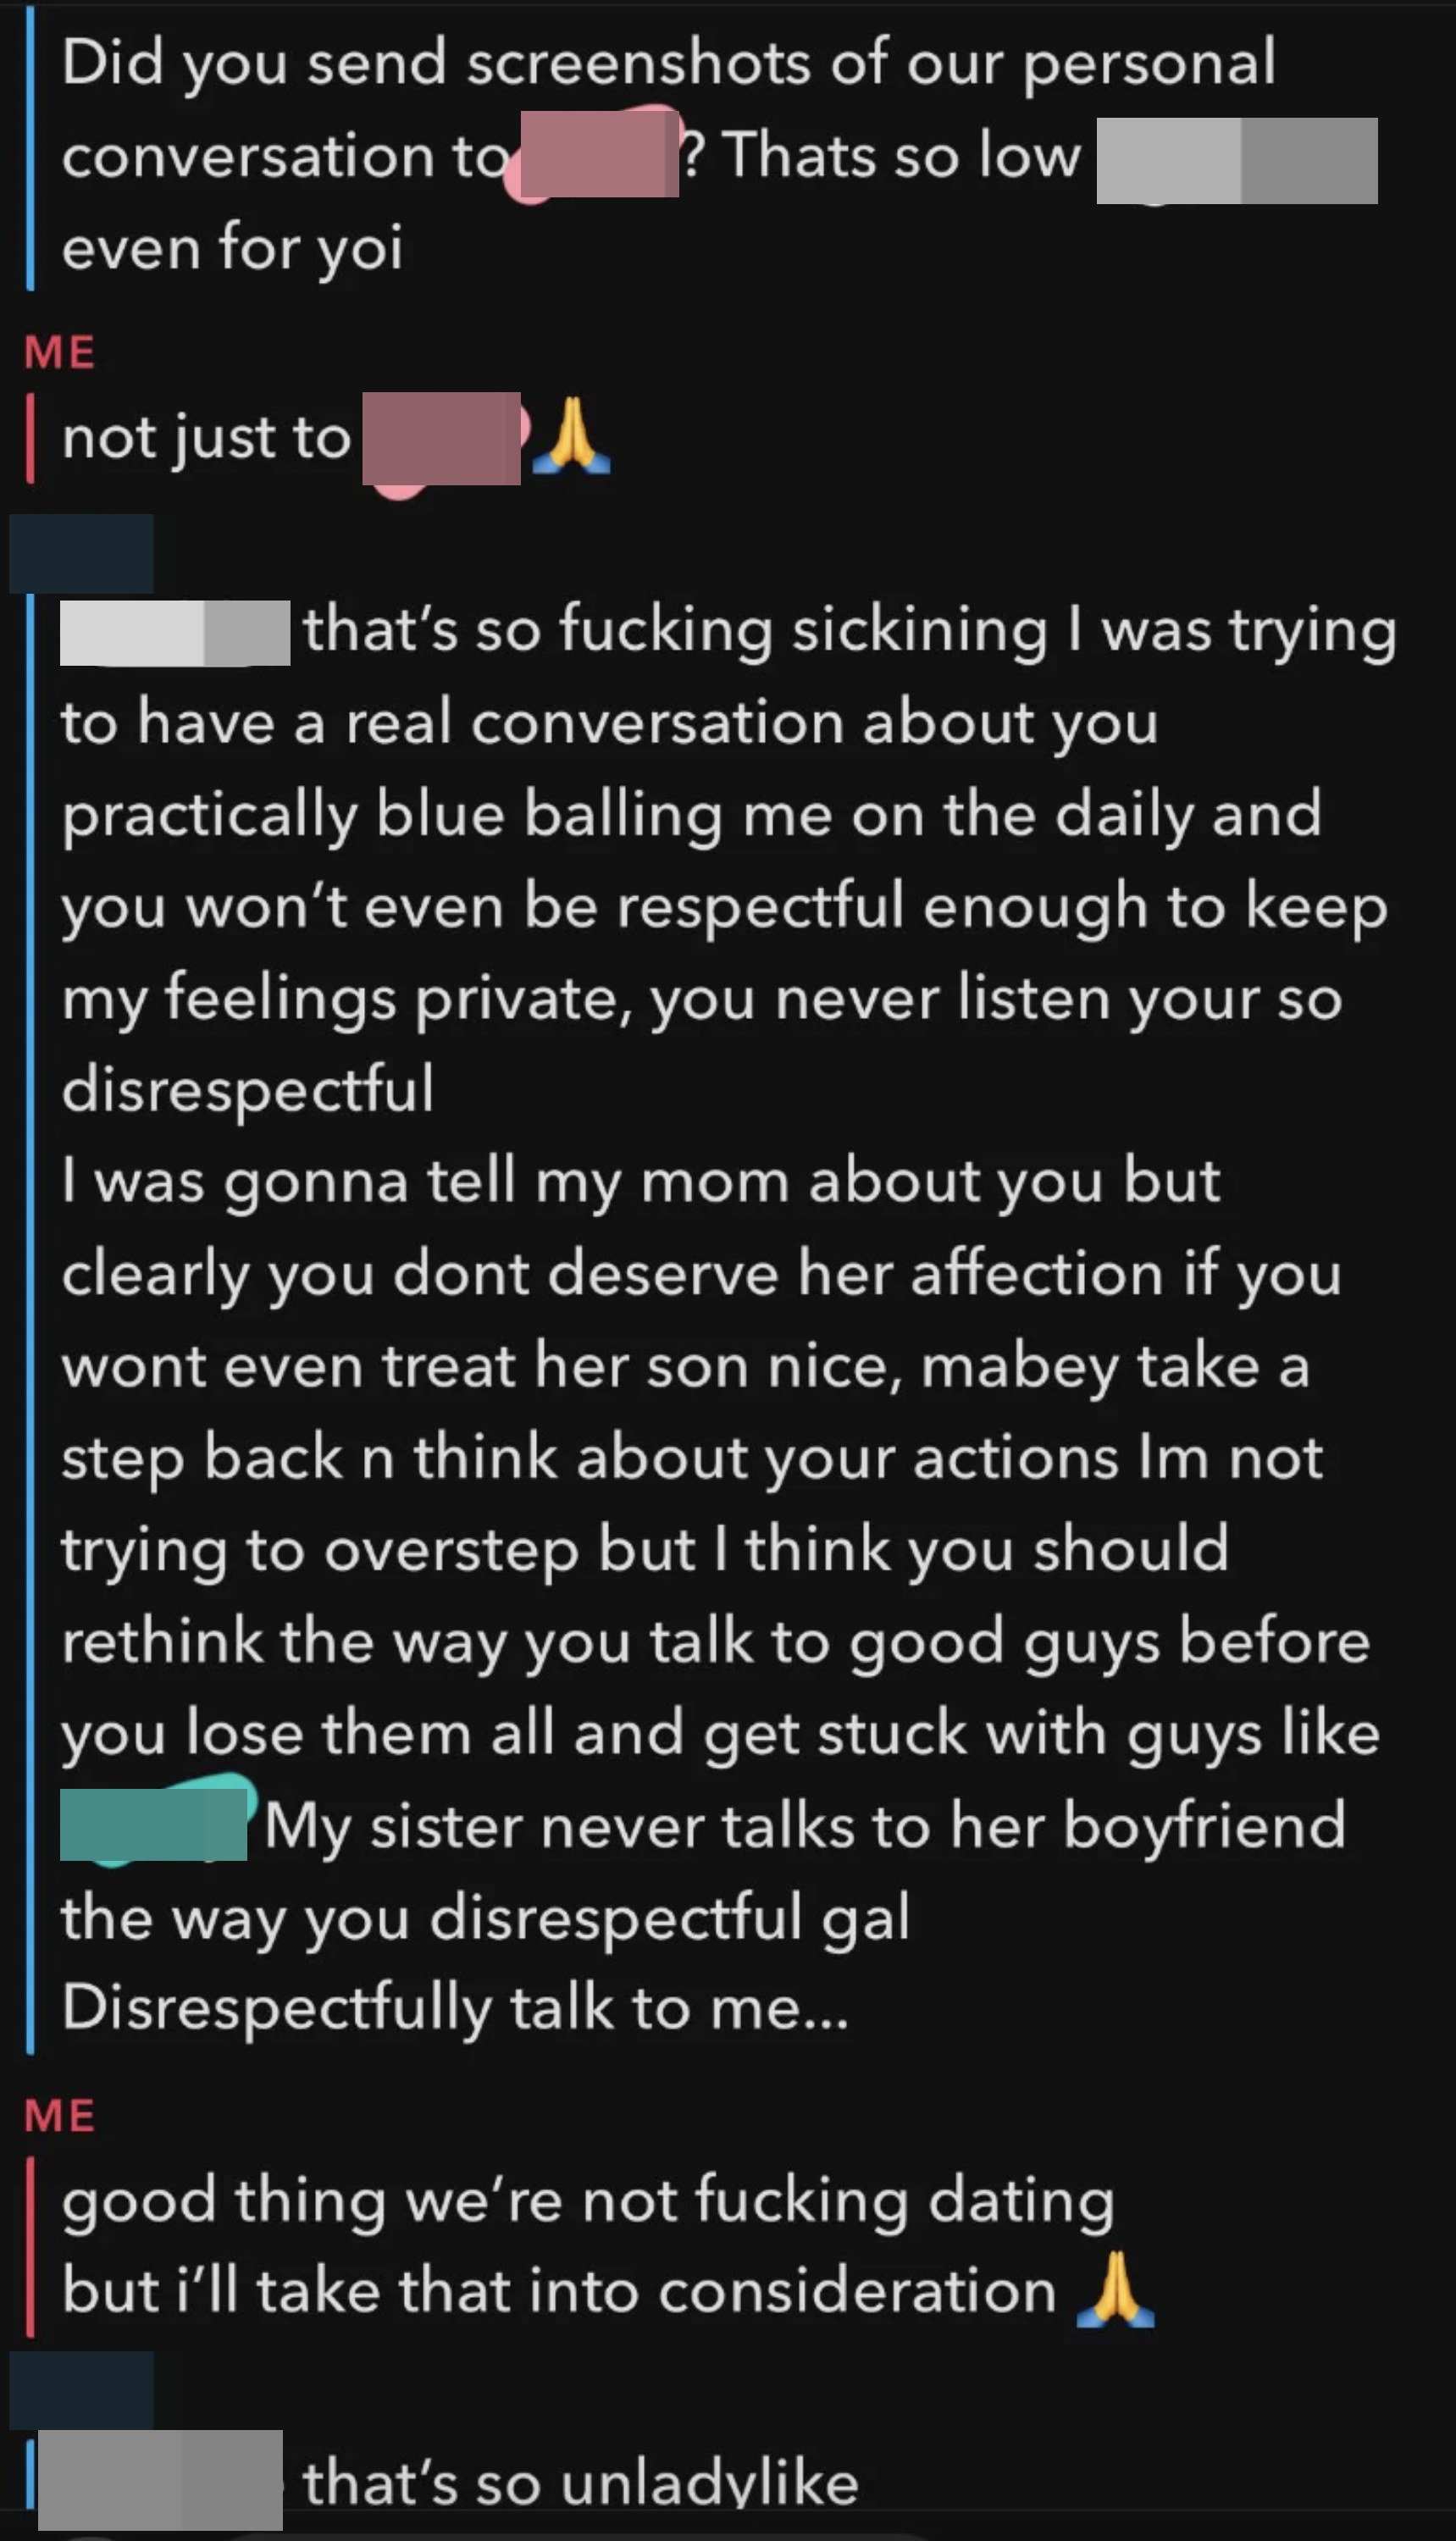 The man from the previous messages gets upset that the woman shared his texts online; when the woman says they&#x27;re not dating, the man tells her she&#x27;s unladylike